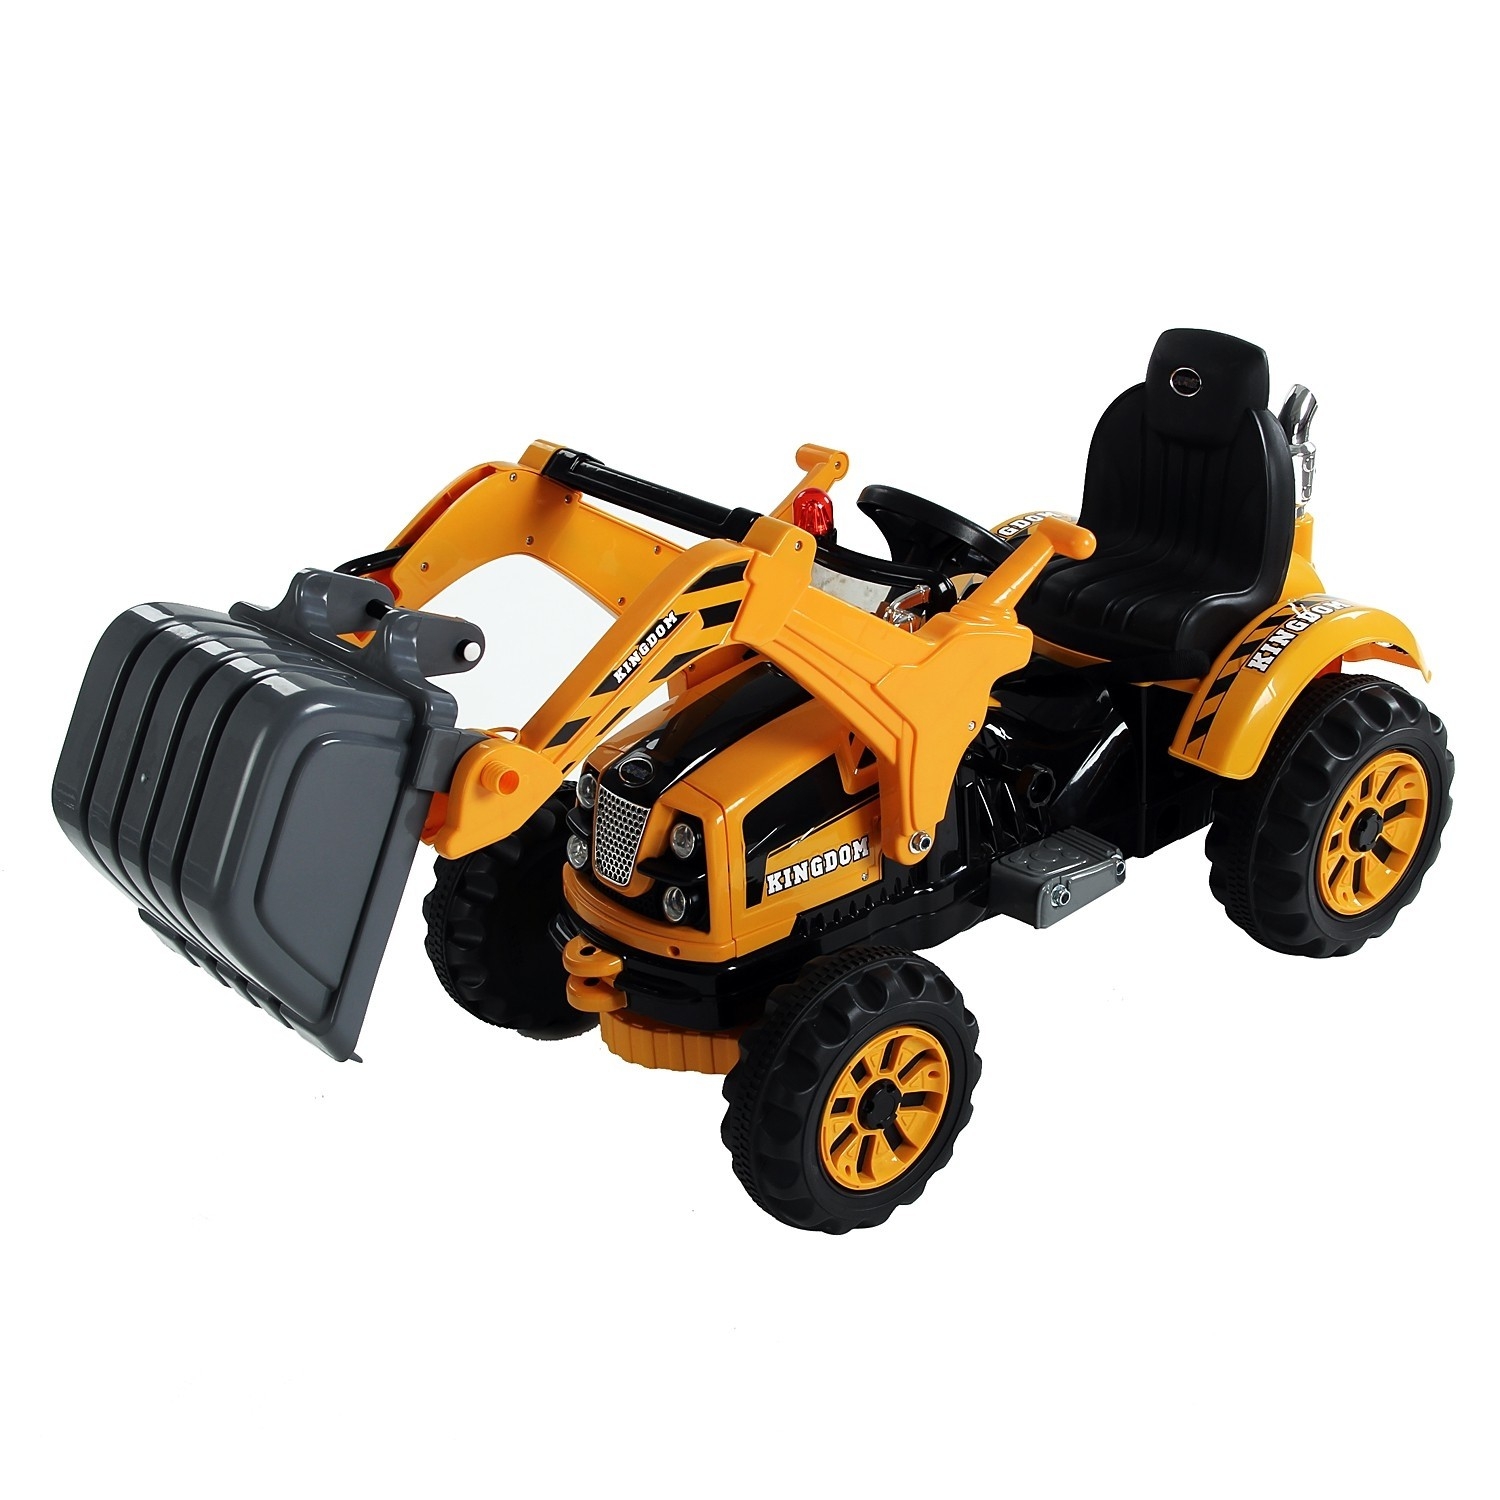 Kids Excavator Ride On Construction Toddler Boys Battery Power Digger Truck Toy 